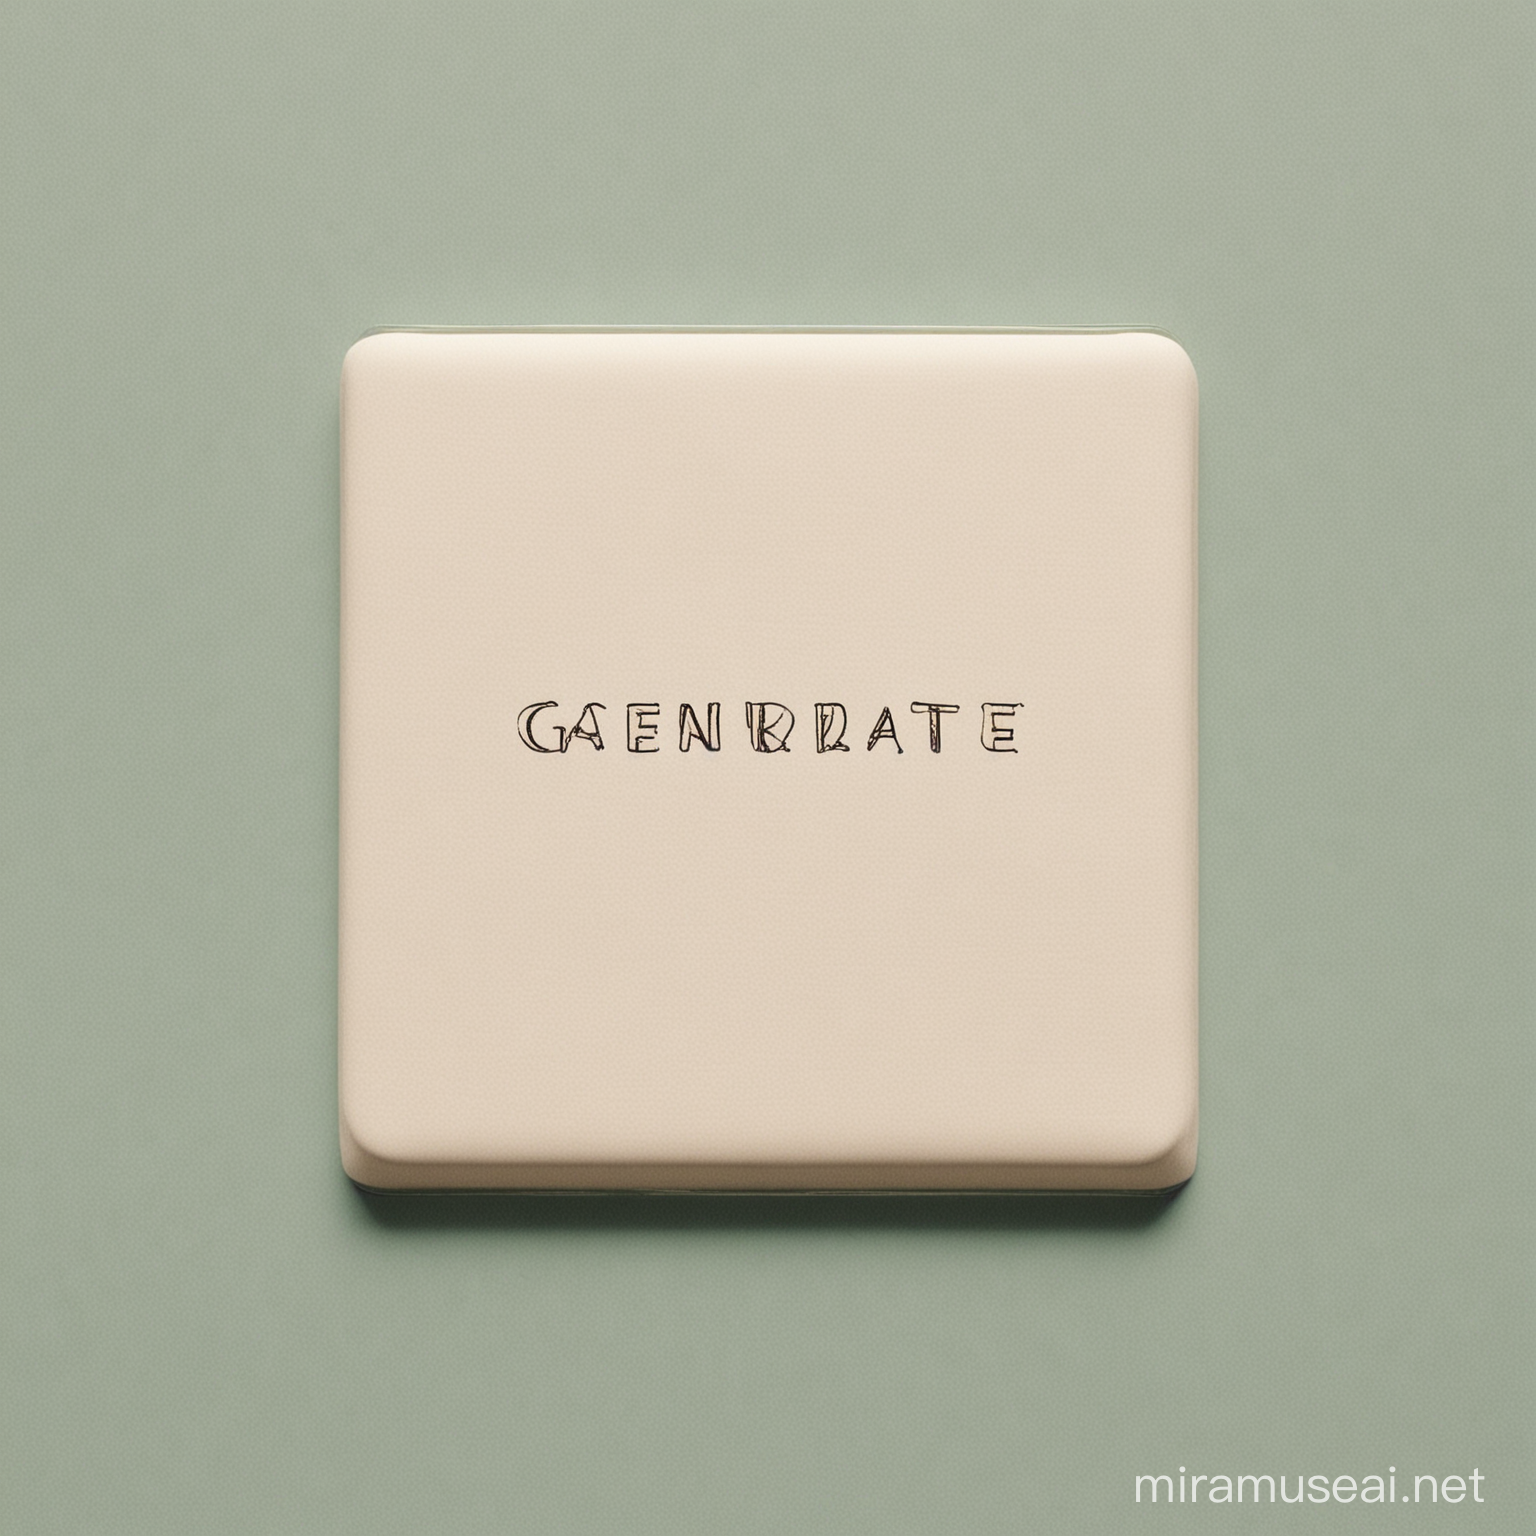 geenrate album art for a playlist full of soft and minimal songs